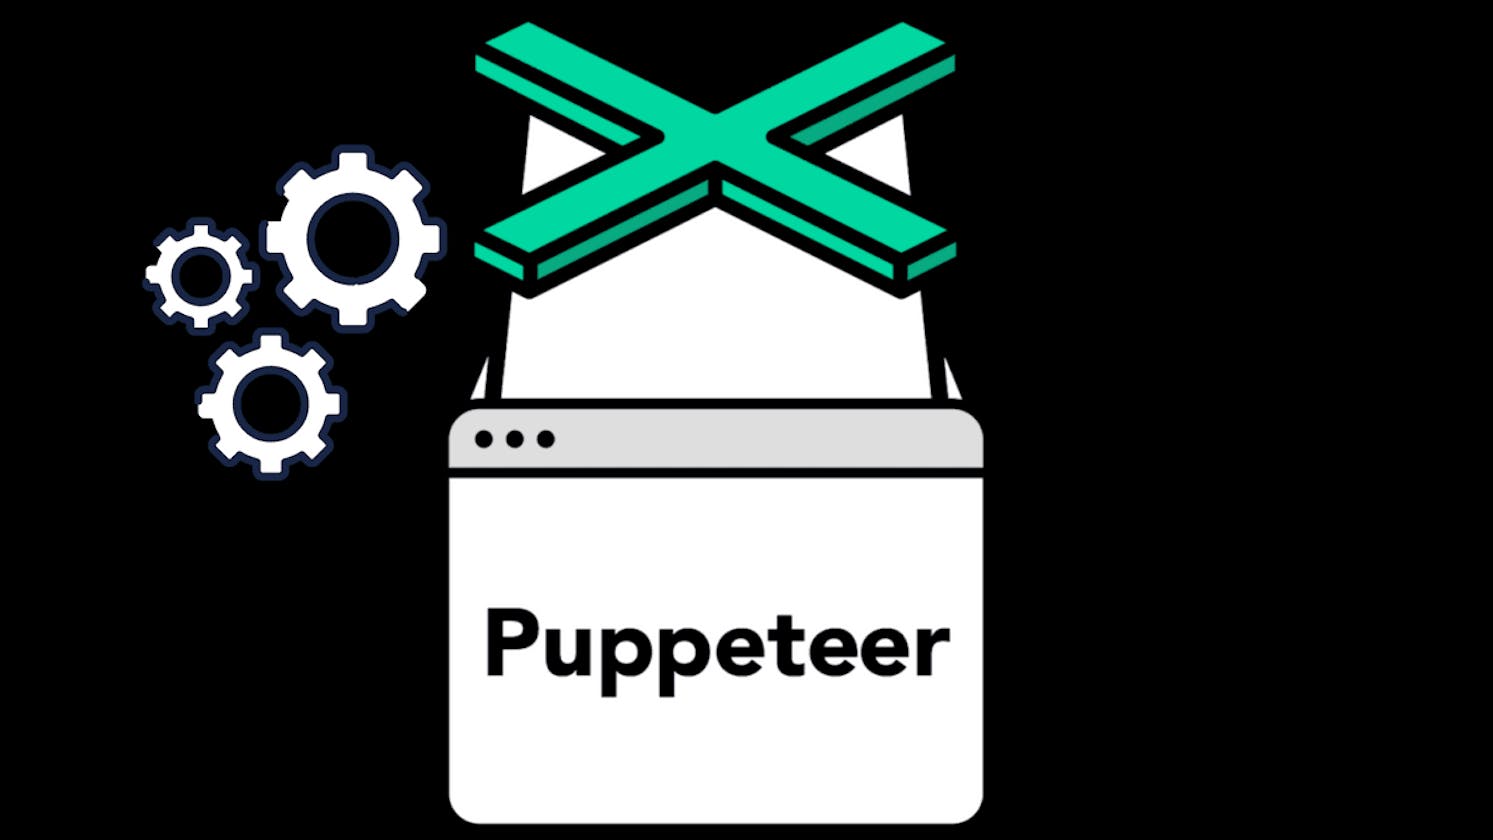 Puppeteer: Empowering Web Automation and Testing